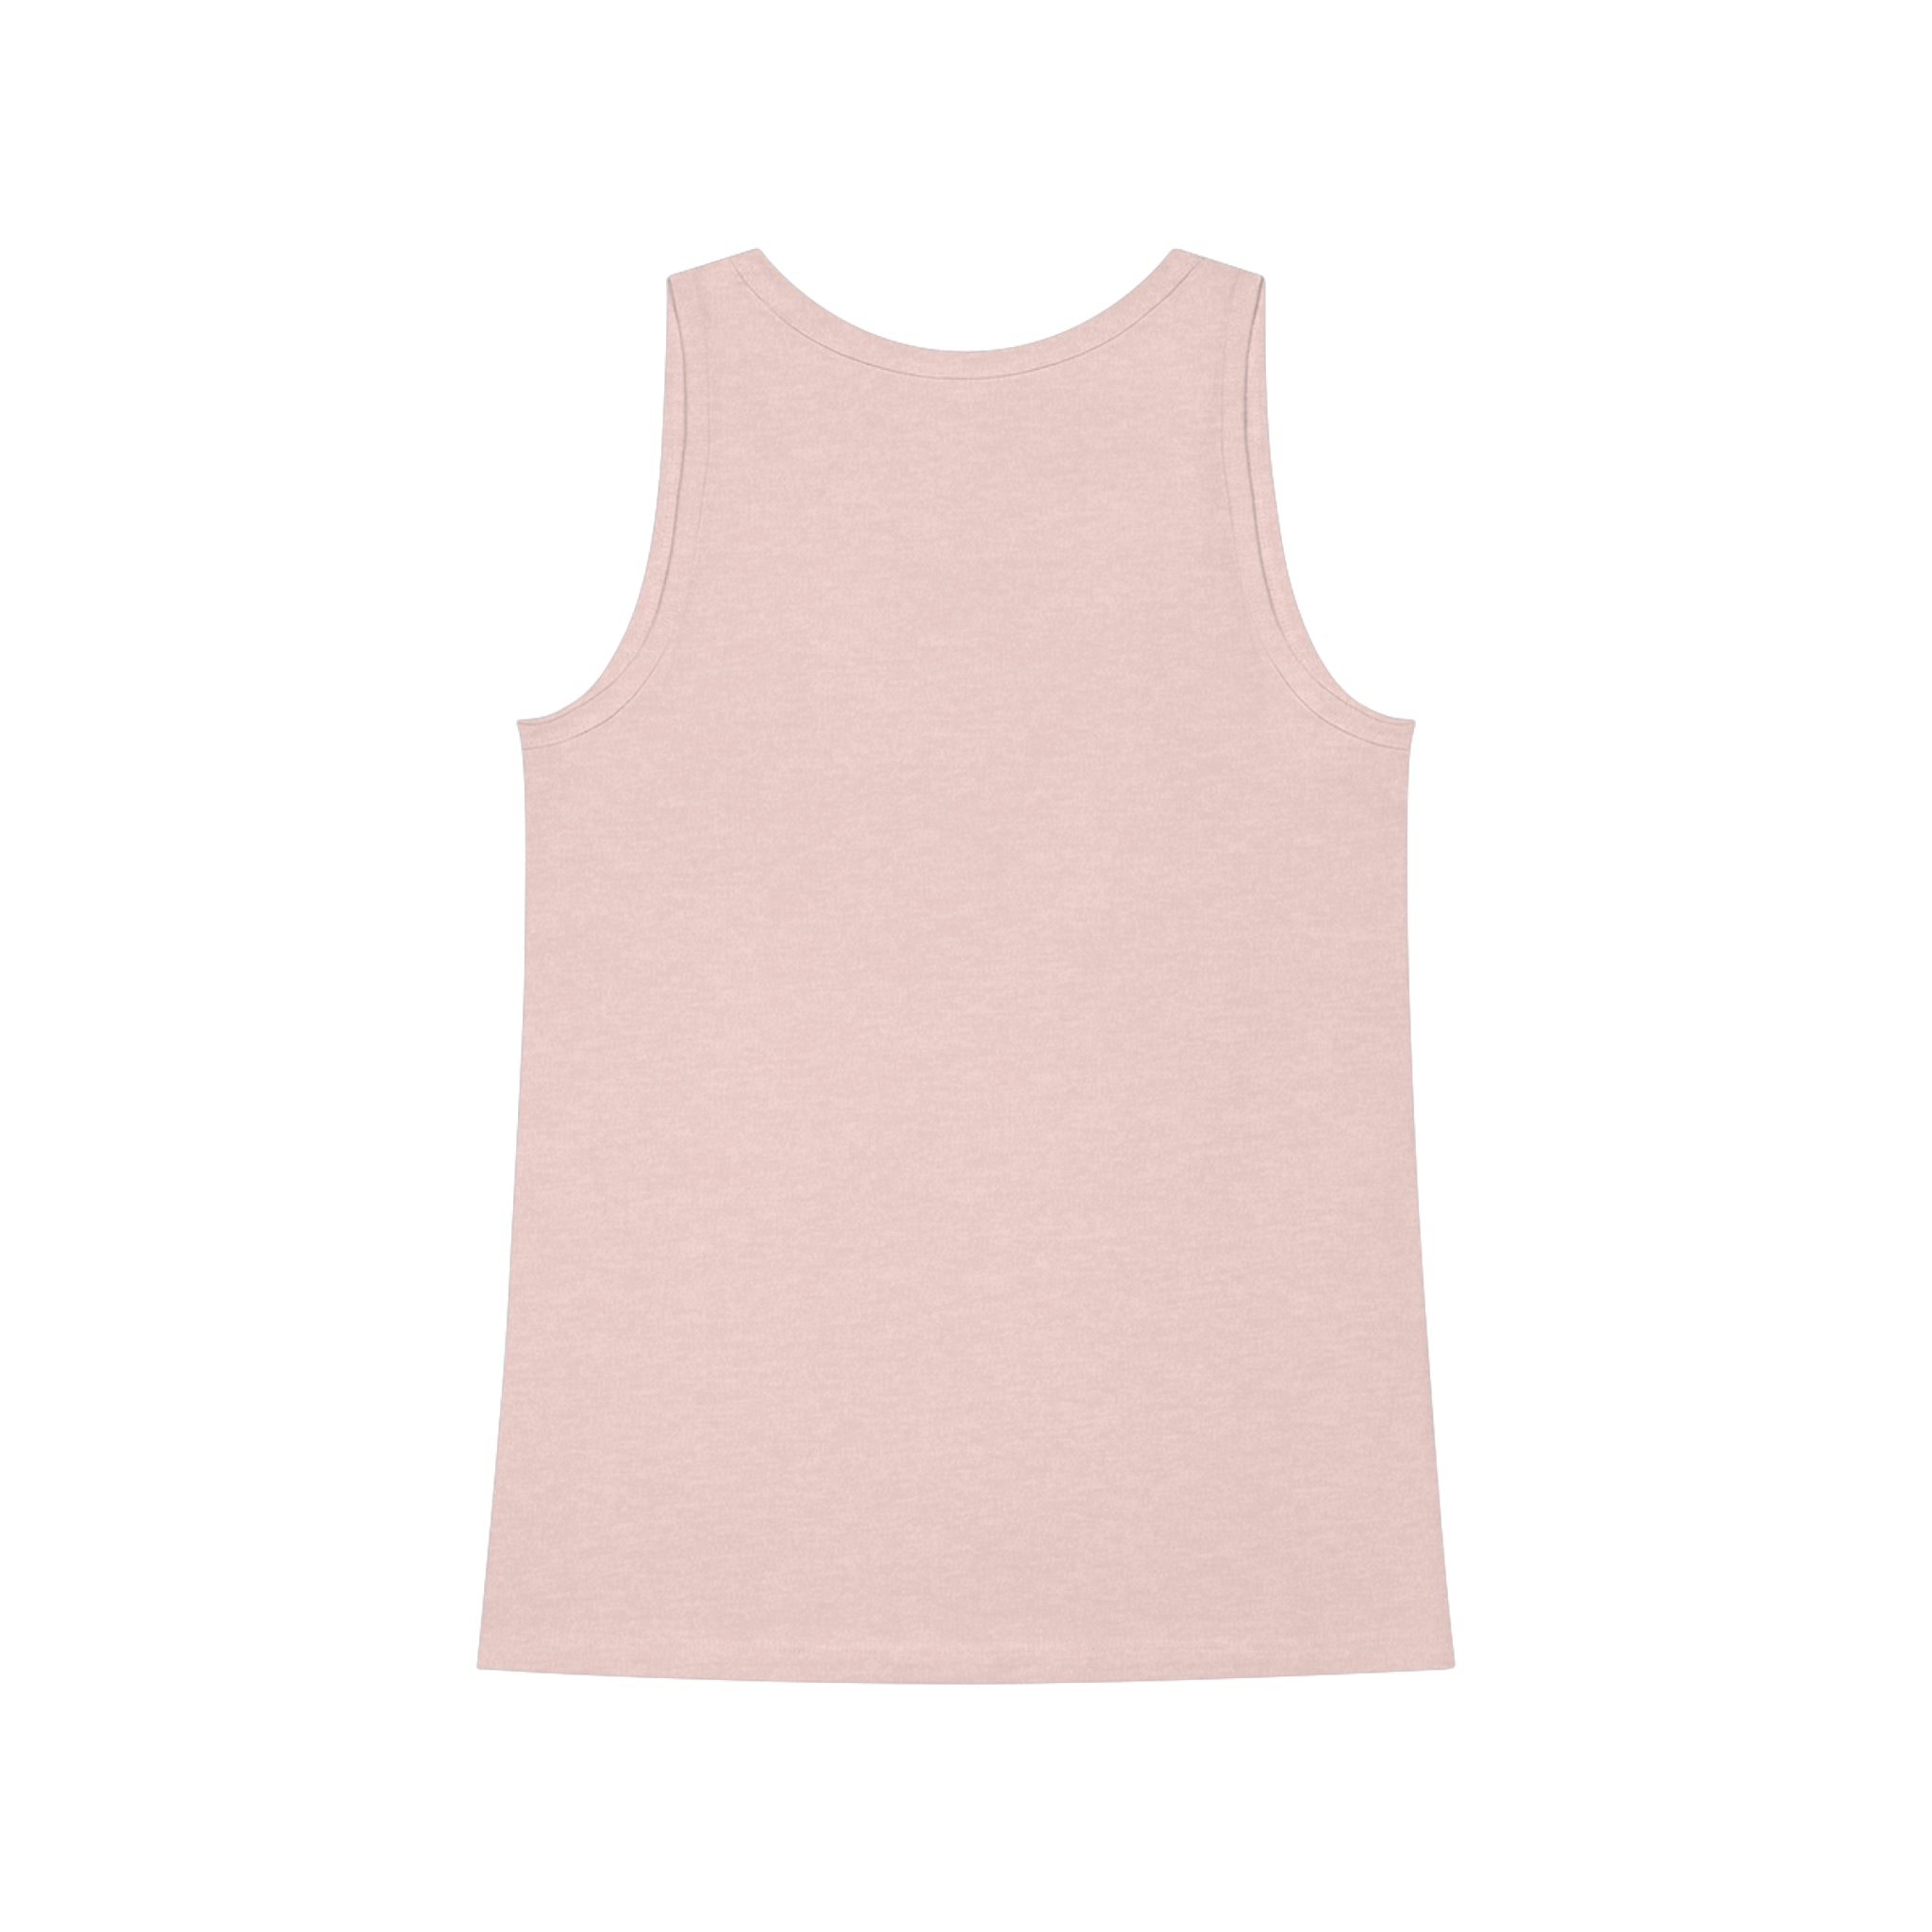 An organic cotton women's pink Rose Tank Top on a white background.